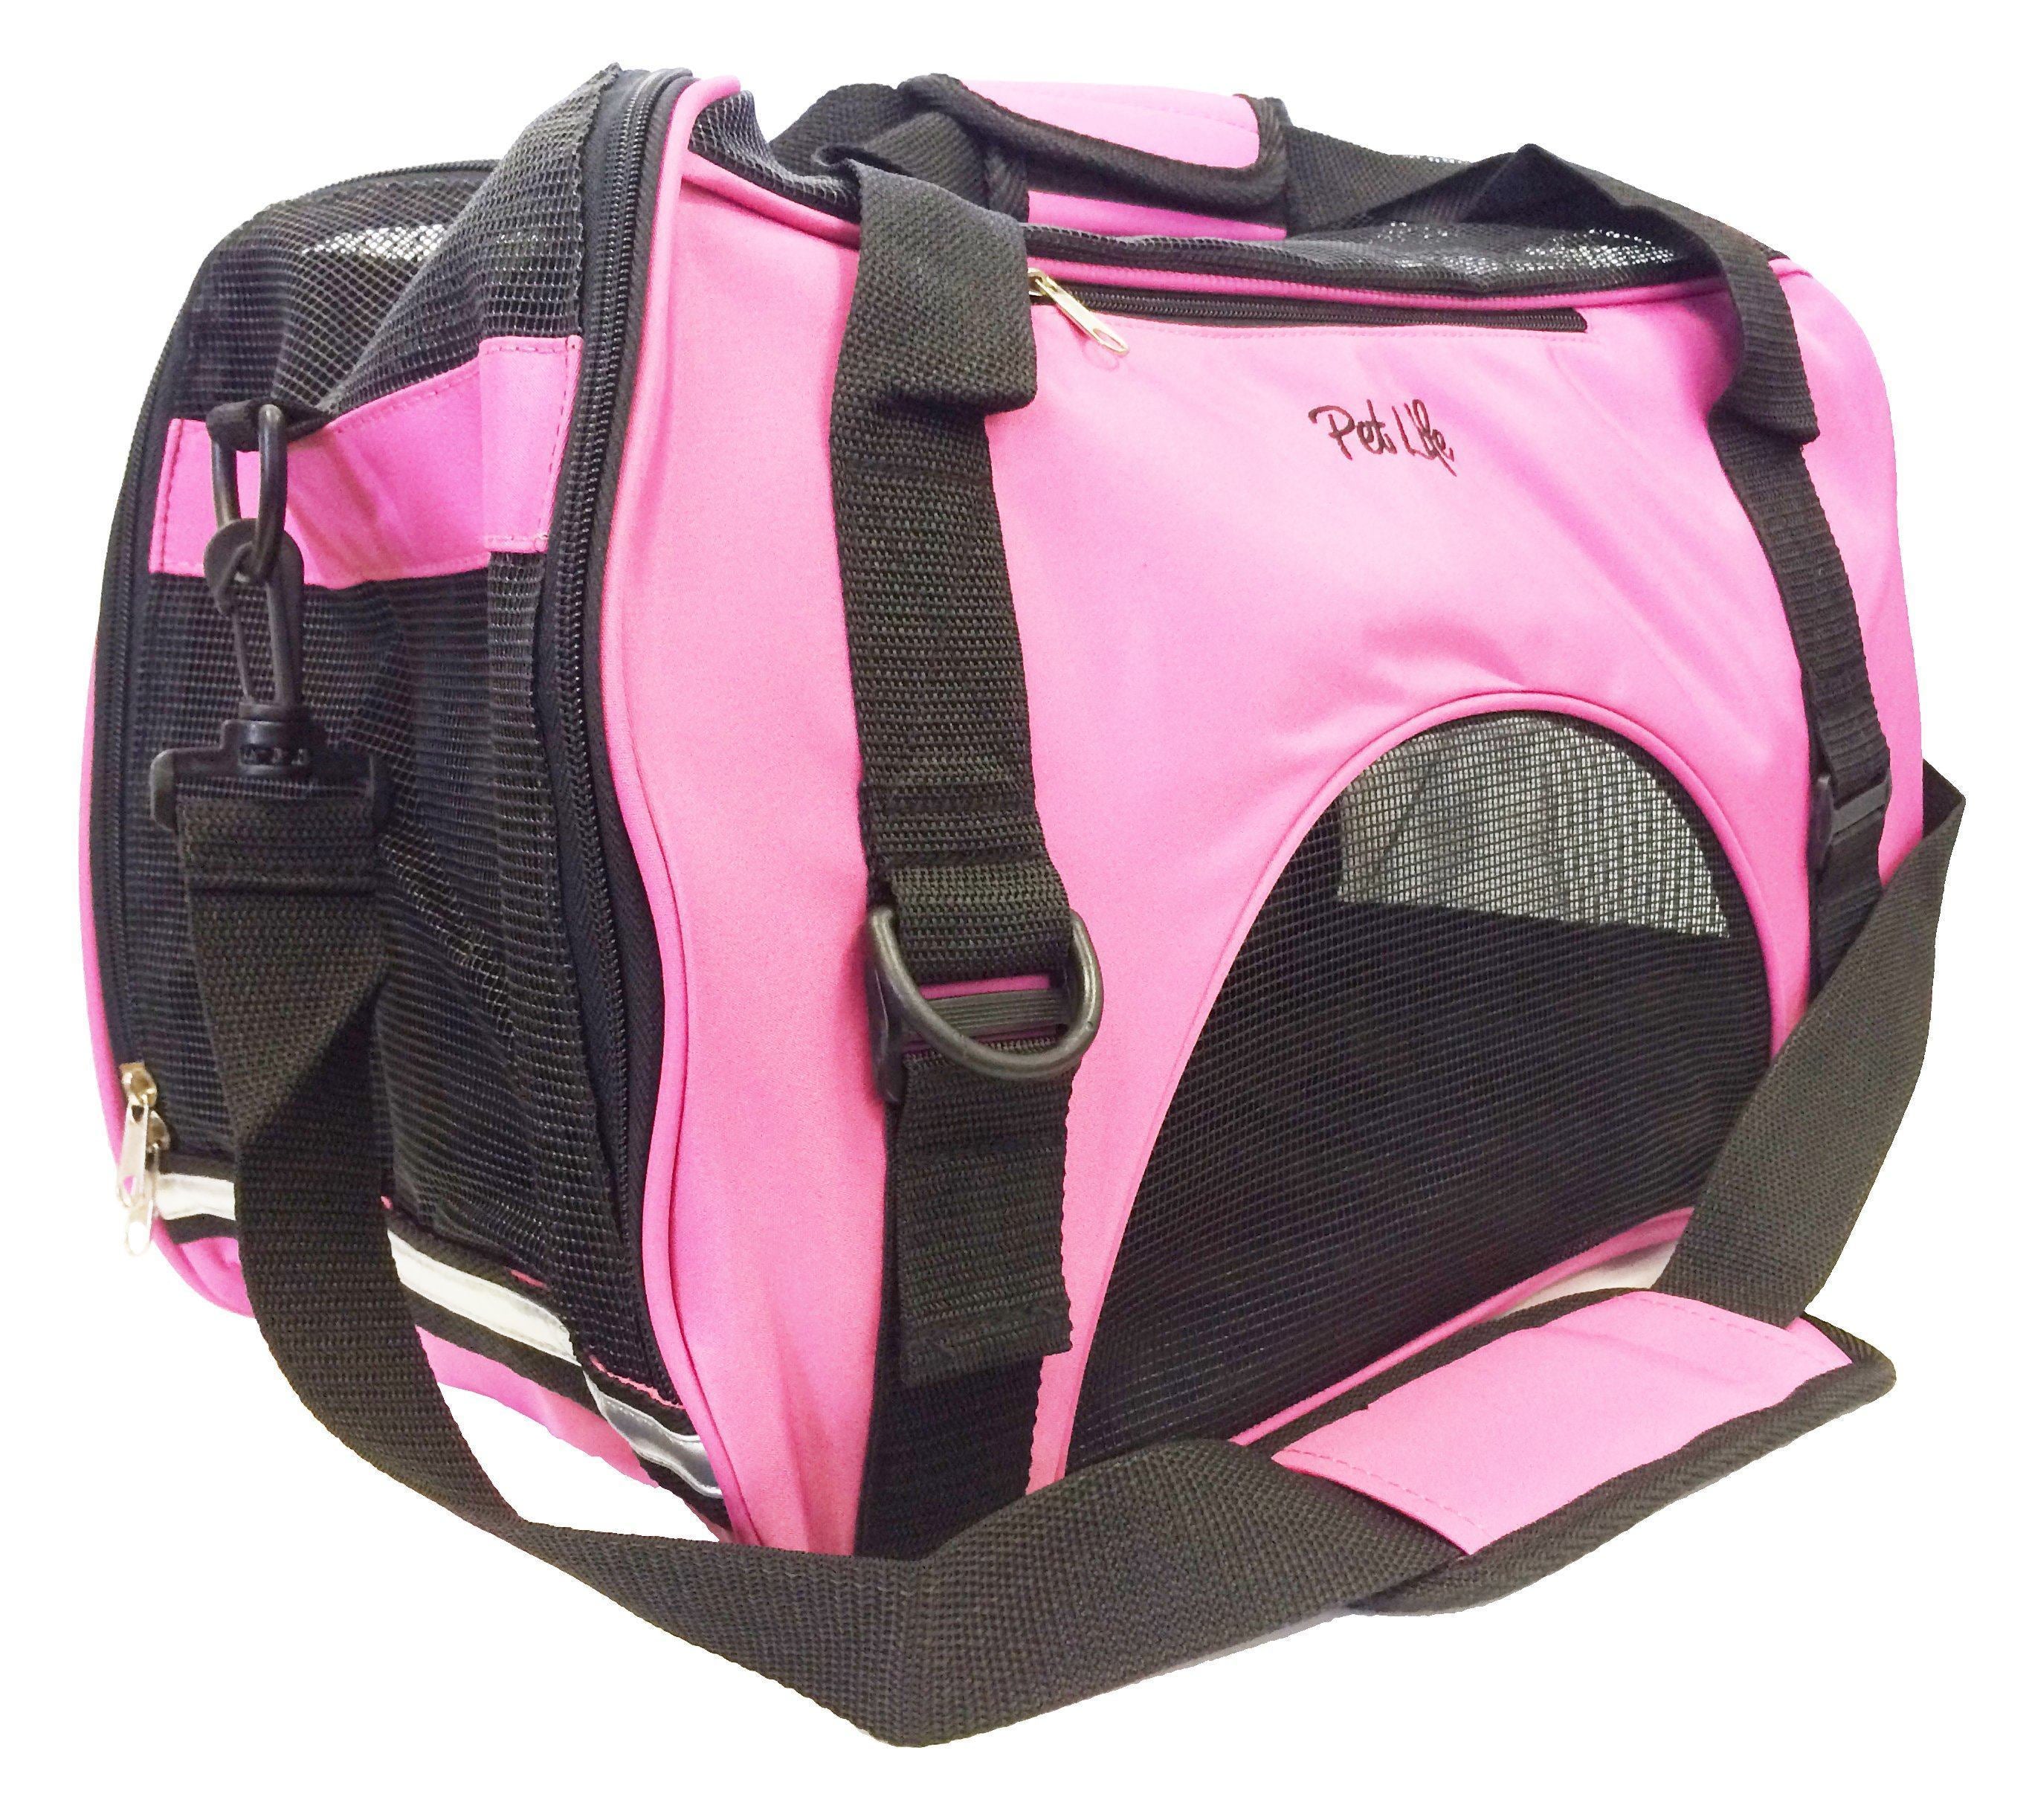 Pet Life ® 'Altitude Force' Airline Approved Sporty Zippered Folding Fashion Pet Dog Carrier Medium Pink